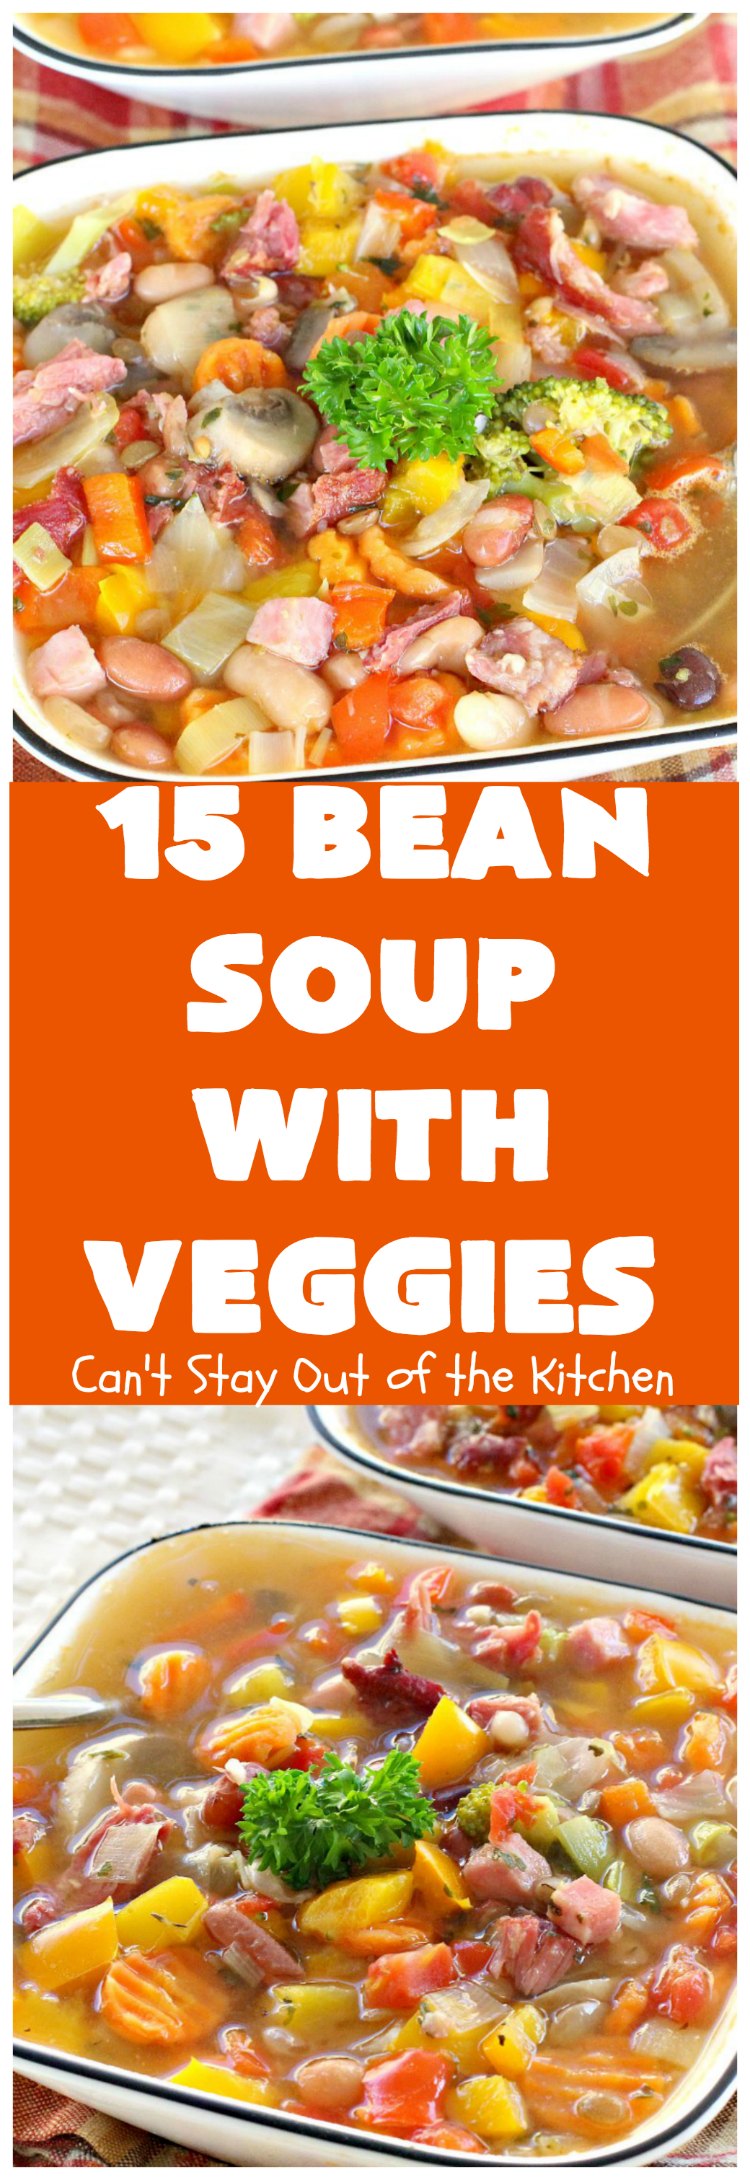 15 Bean Soup with Veggies | Can't Stay Out of the Kitchen